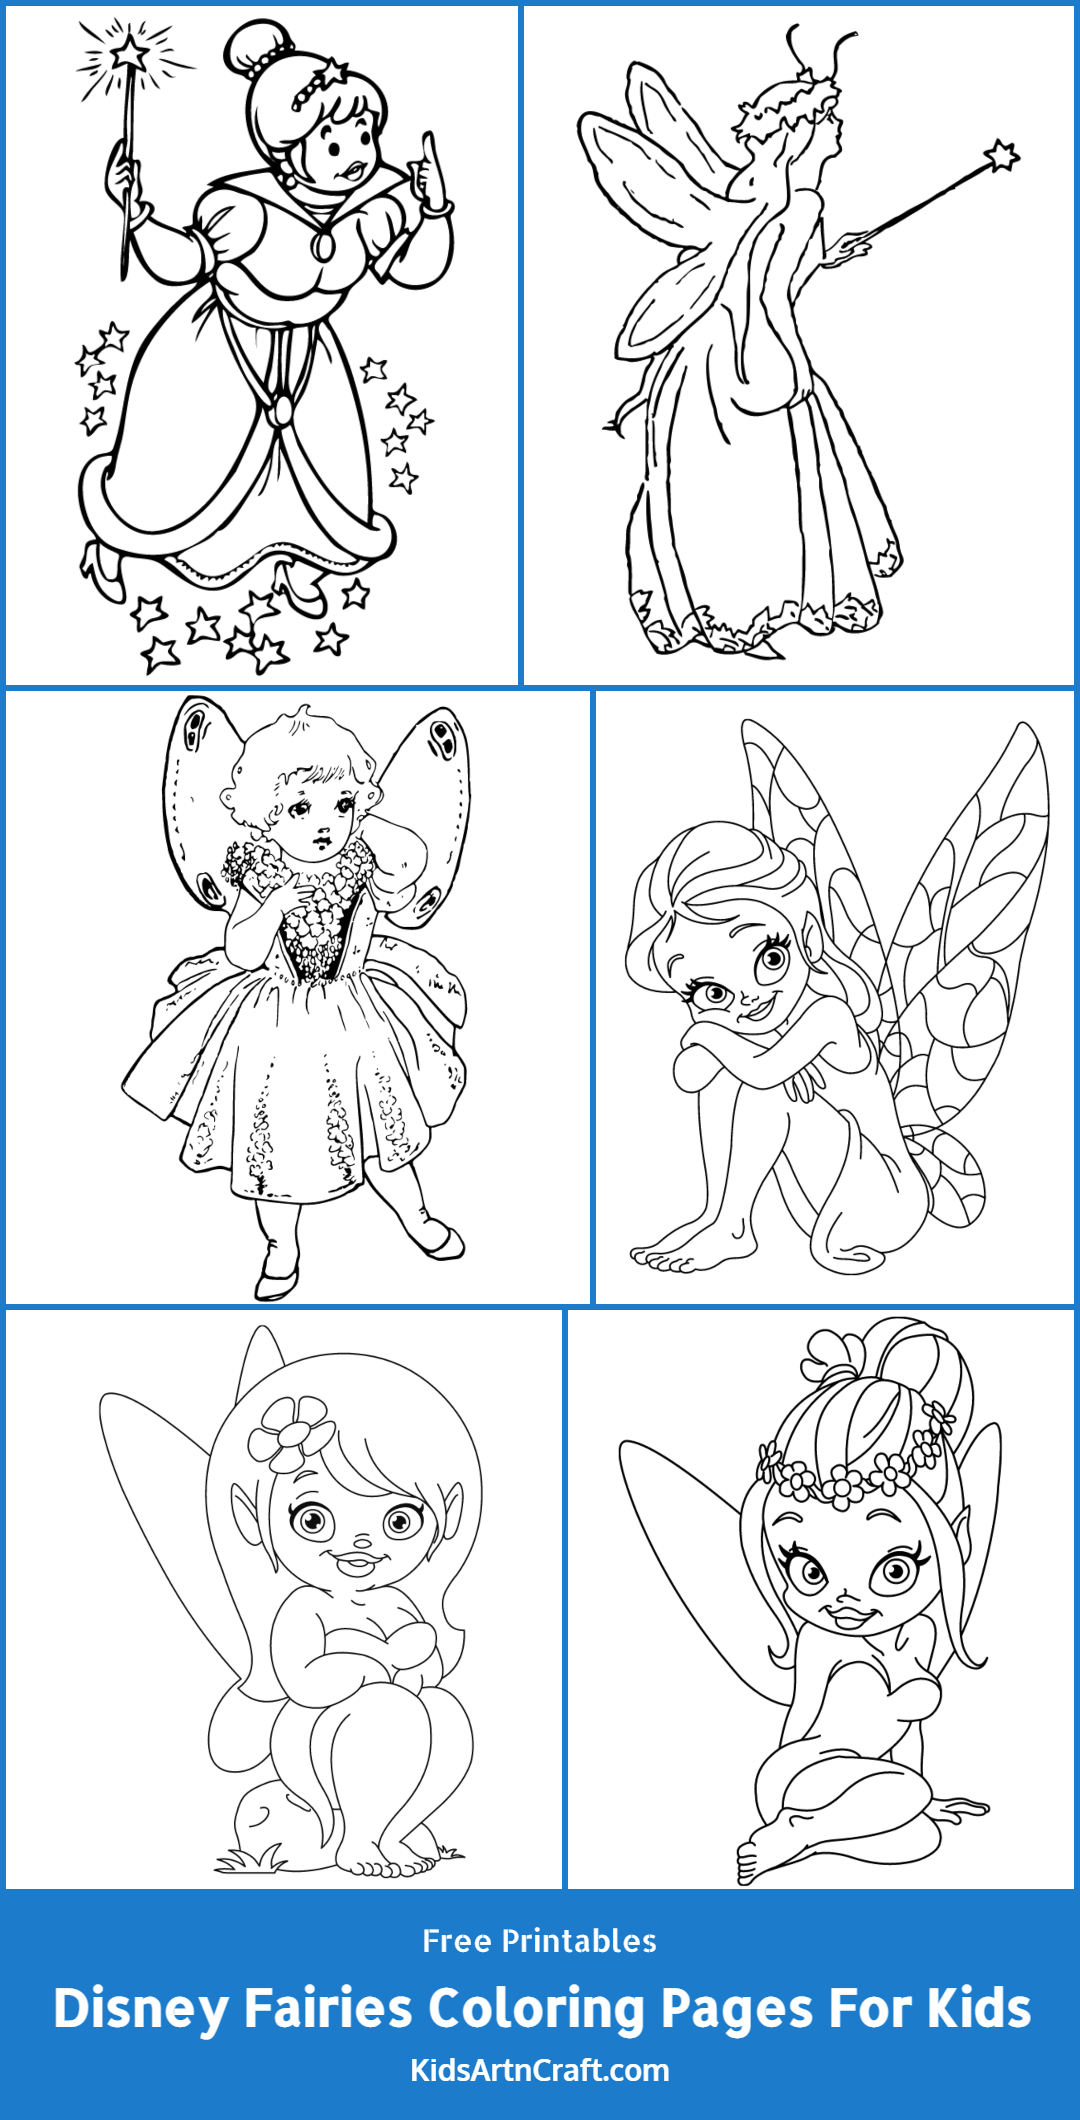 Disney Fairies Coloring Pages For Kids – Free Printables